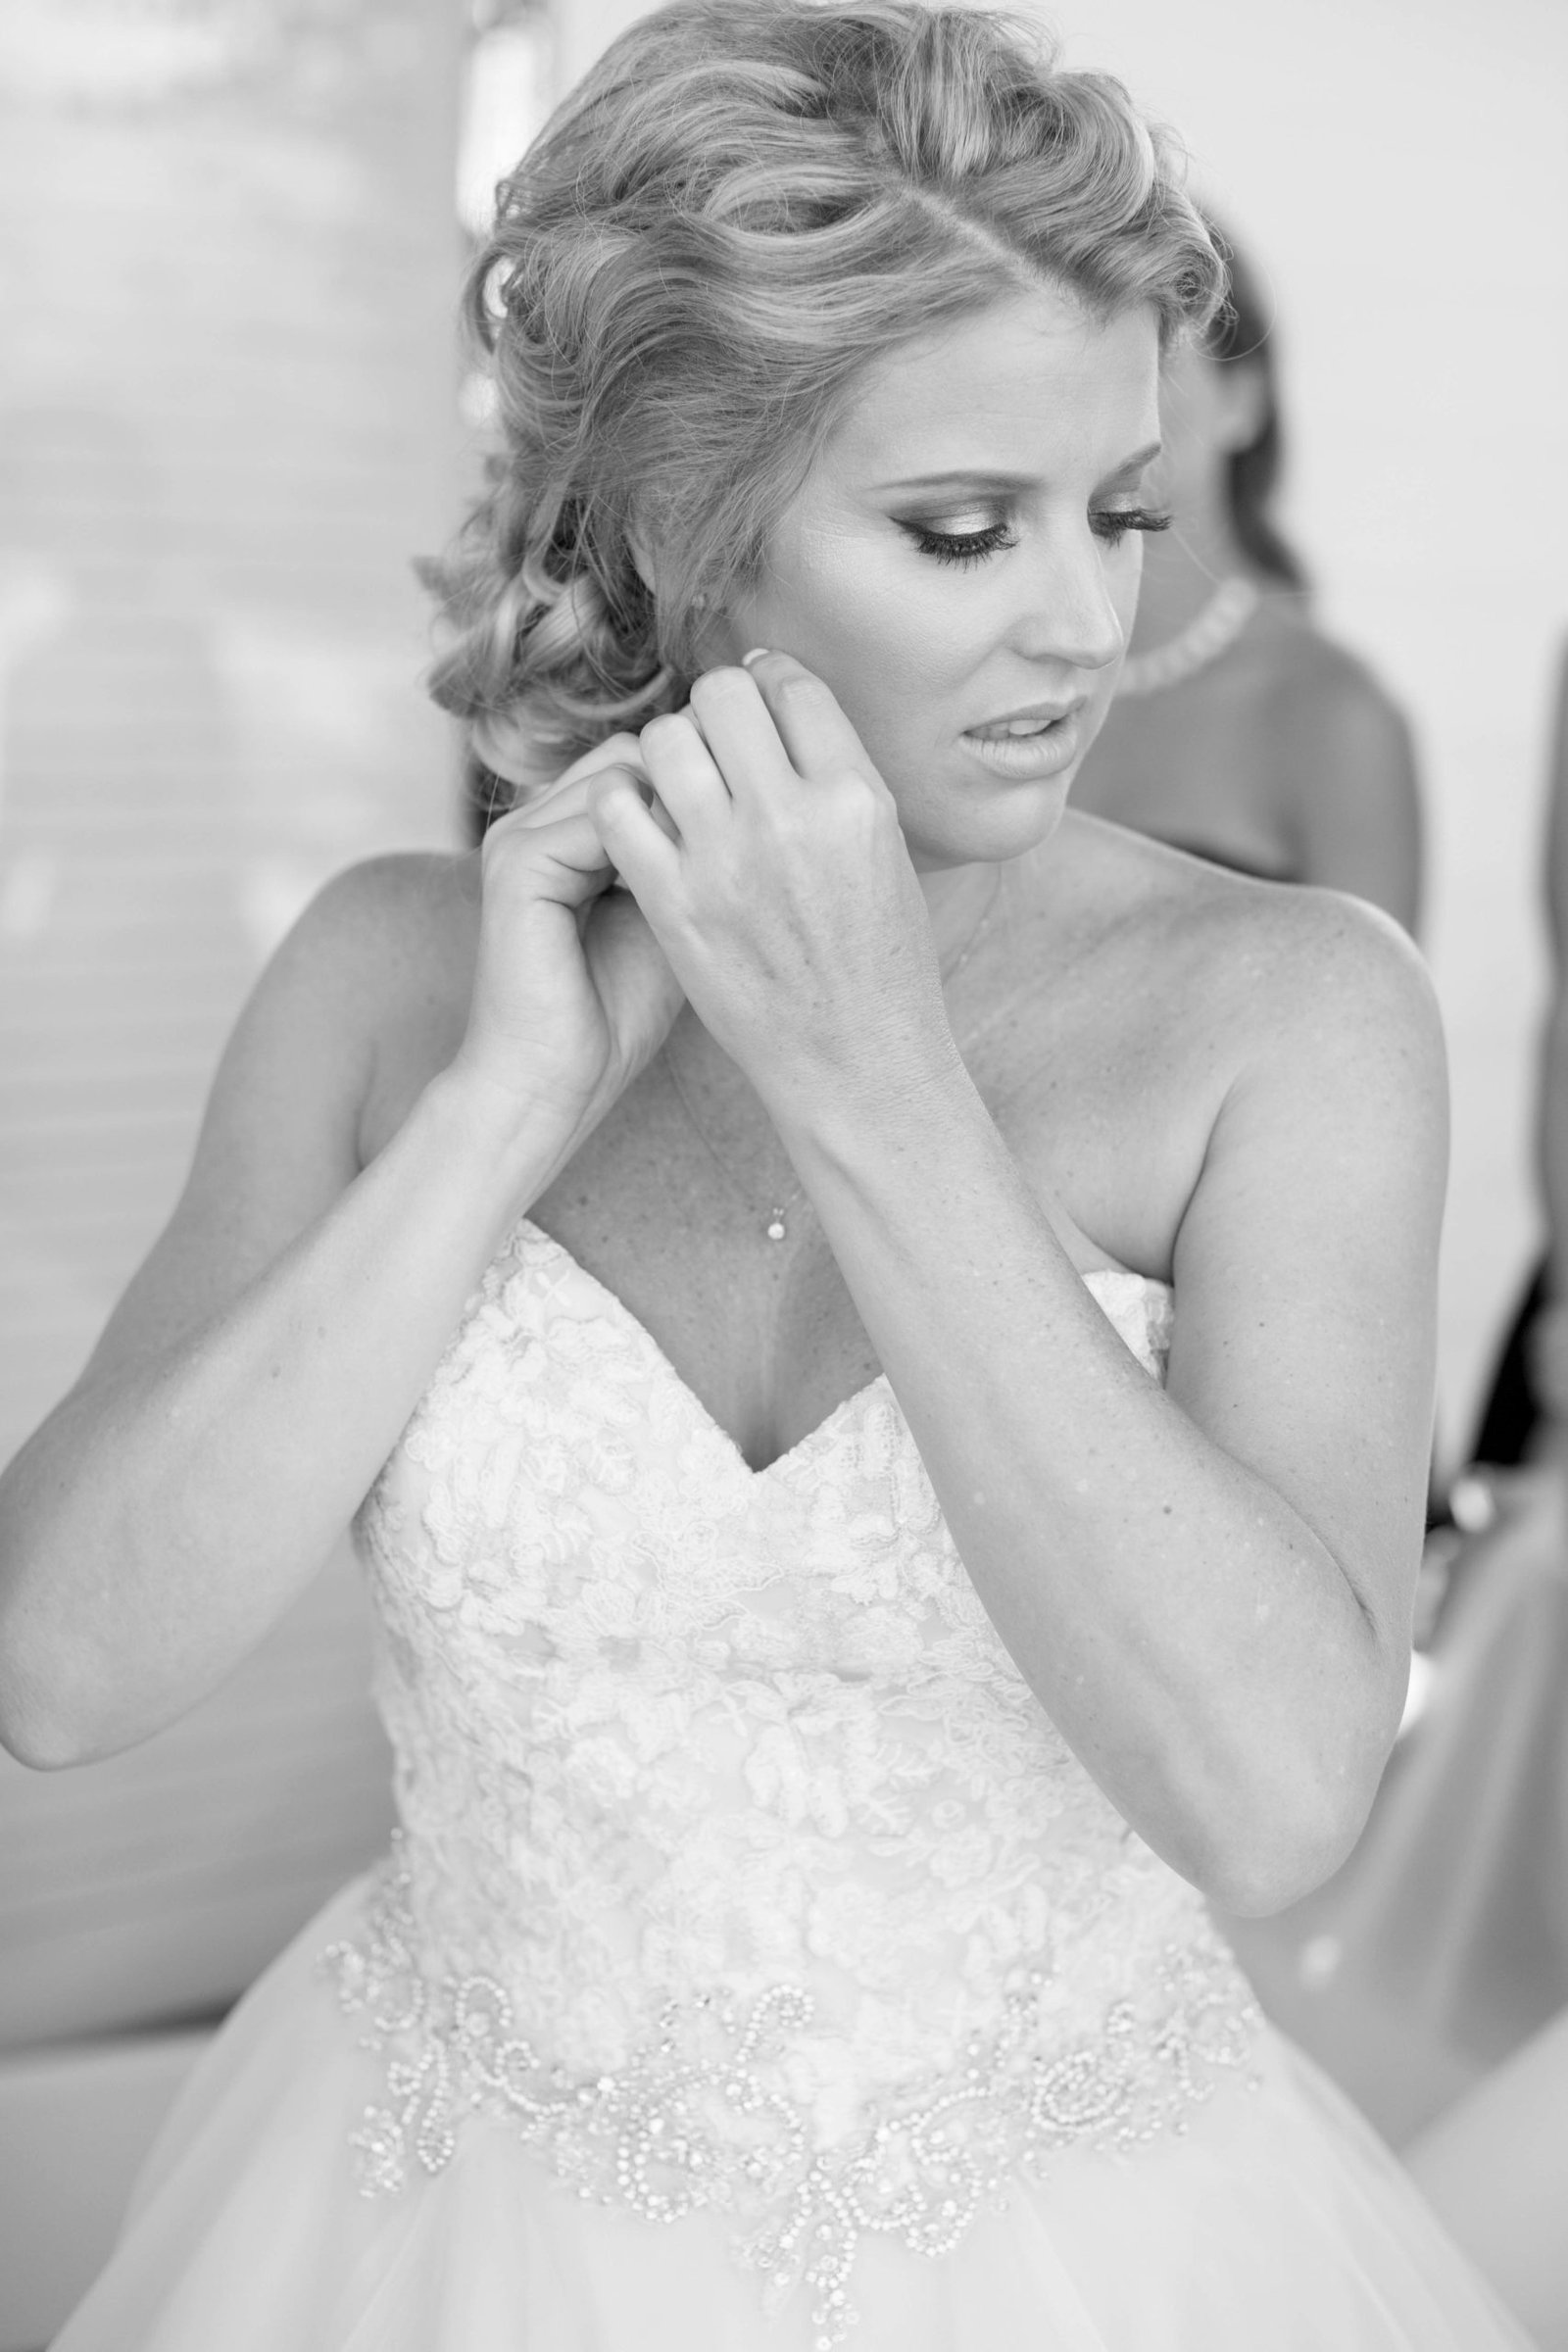 Bride putting n an earring before the wedding ceremony at Higuera Ranch